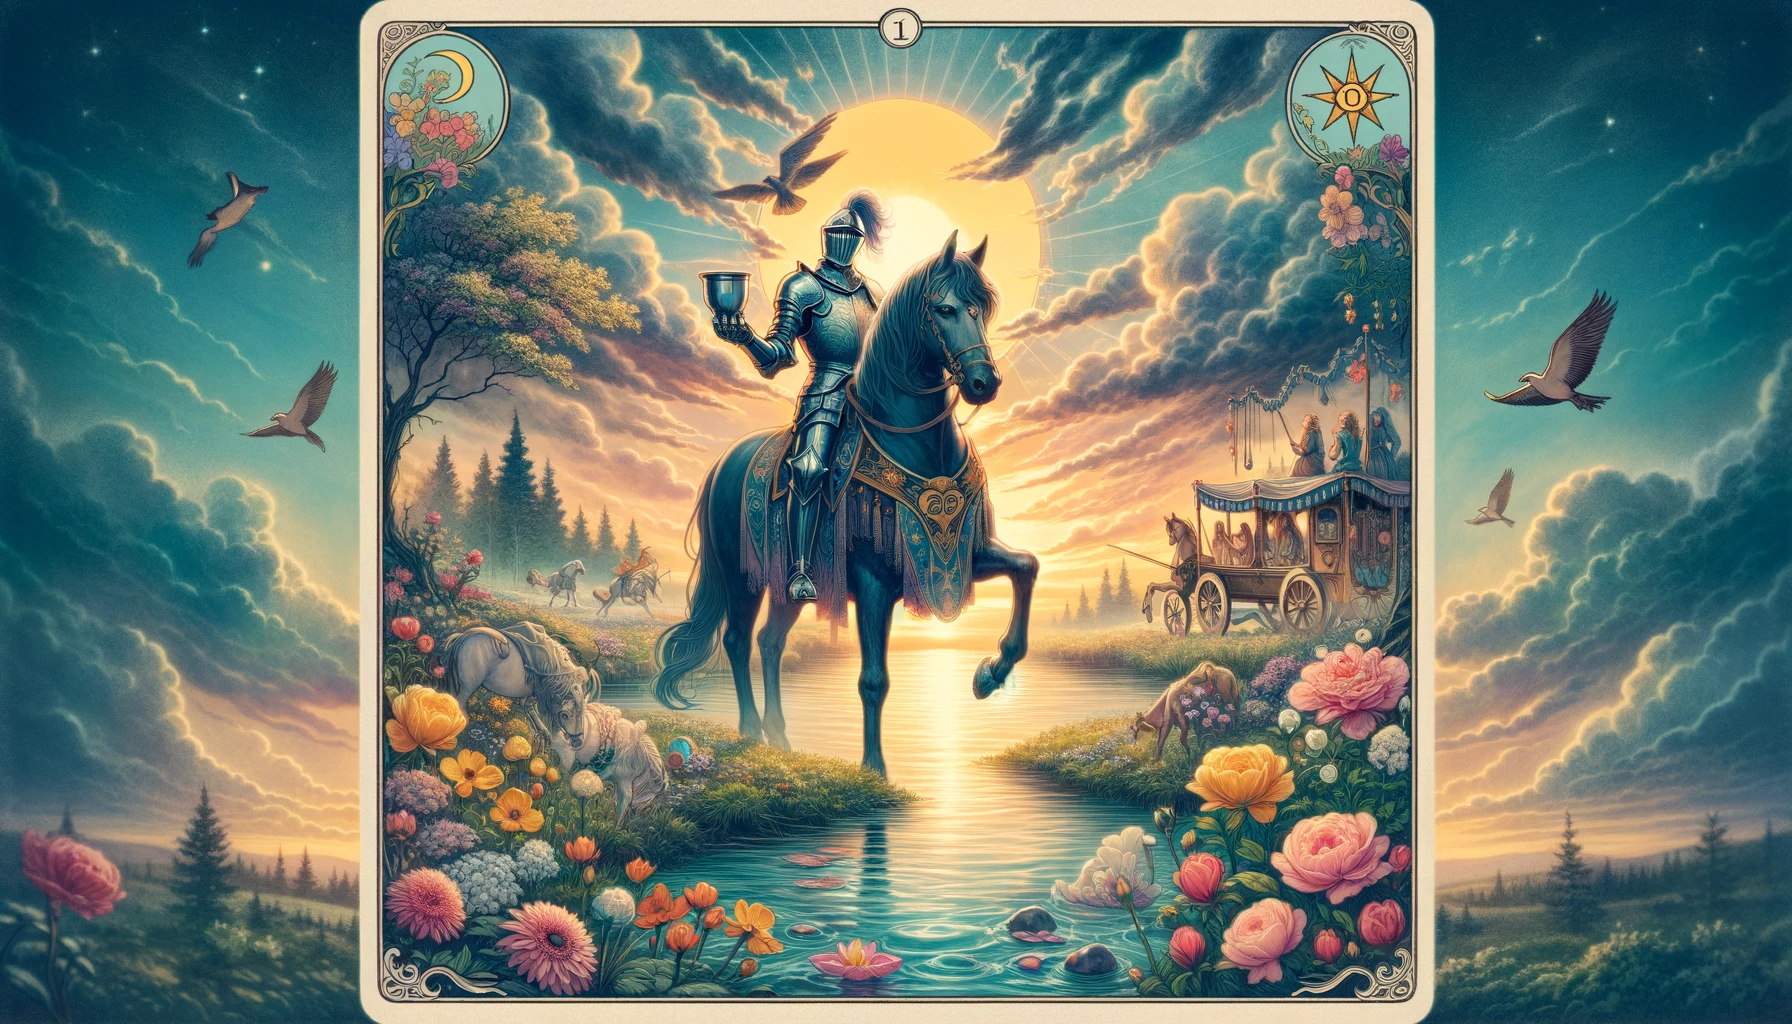 "Illustration portraying a romantic and dreamy atmosphere with a knight symbolizing charm, affection, and sensitivity amidst symbols of love and emotional depth, suggesting an invitation to love and emotional proposals."